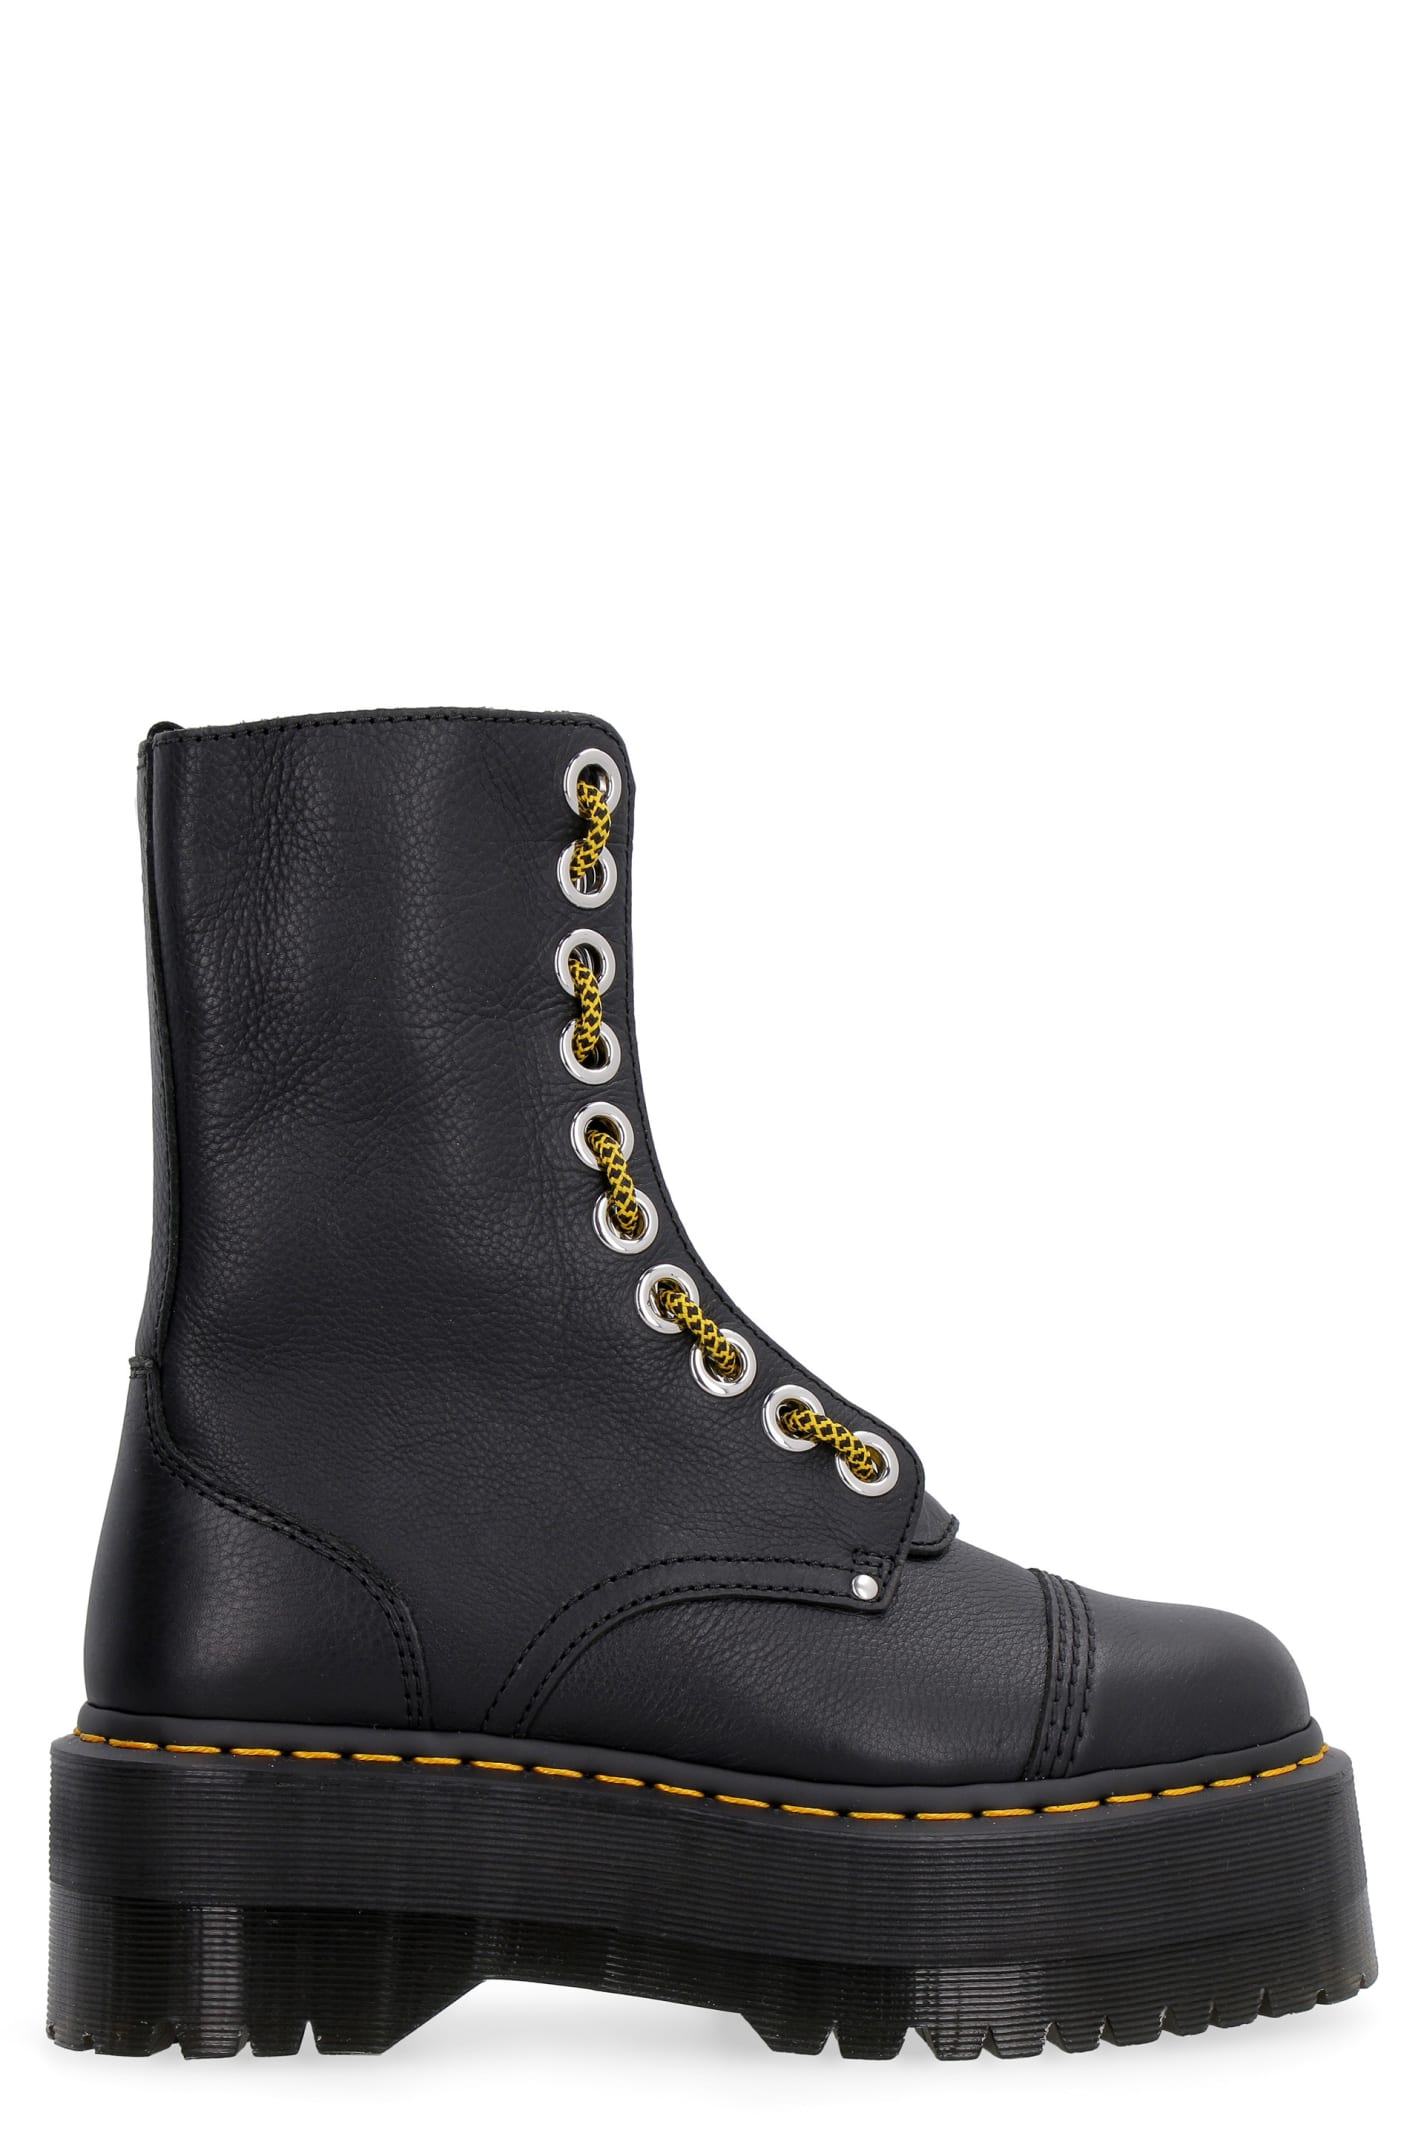 Buy Dr. Martens Sinclair Hi Max Pebbled Leather Boots online, shop Dr. Martens shoes with free shipping